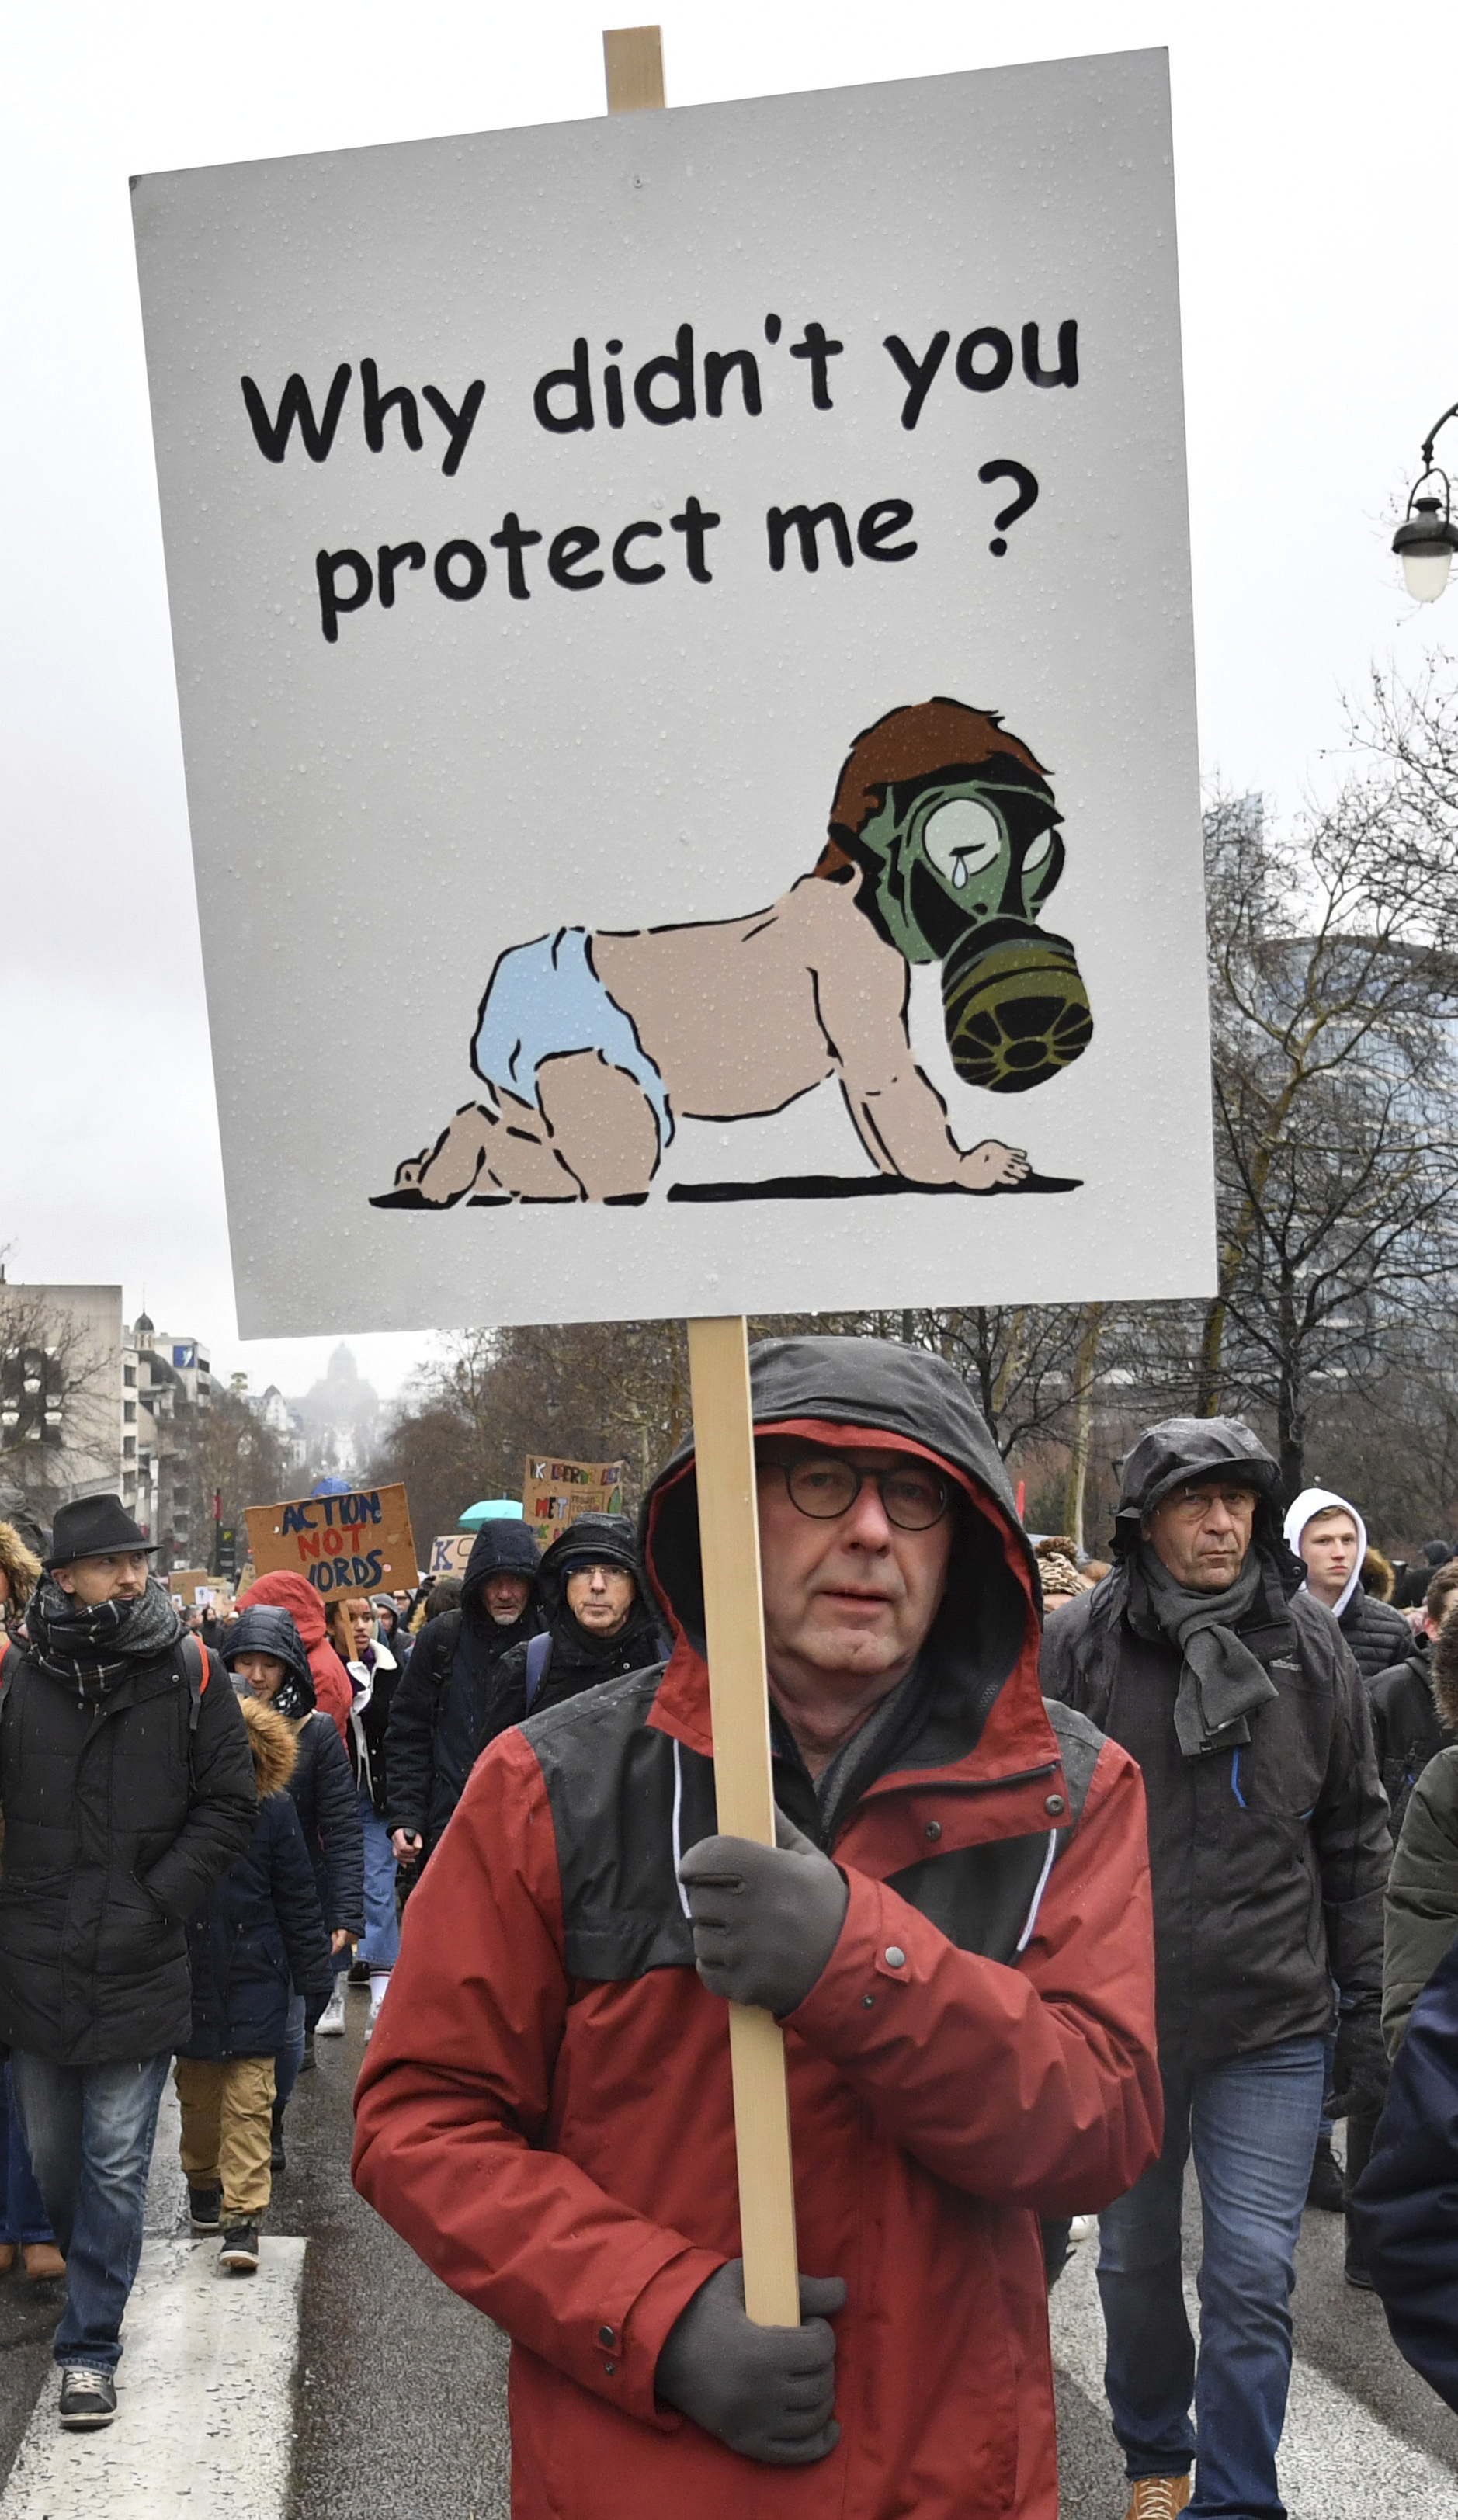 A protestor holds a placard as he marches during a Rise for the Climate demonstration in Brussels, Sunday, Jan. 27, 2019. (AP Photo/Geert Vanden Wijngaert)